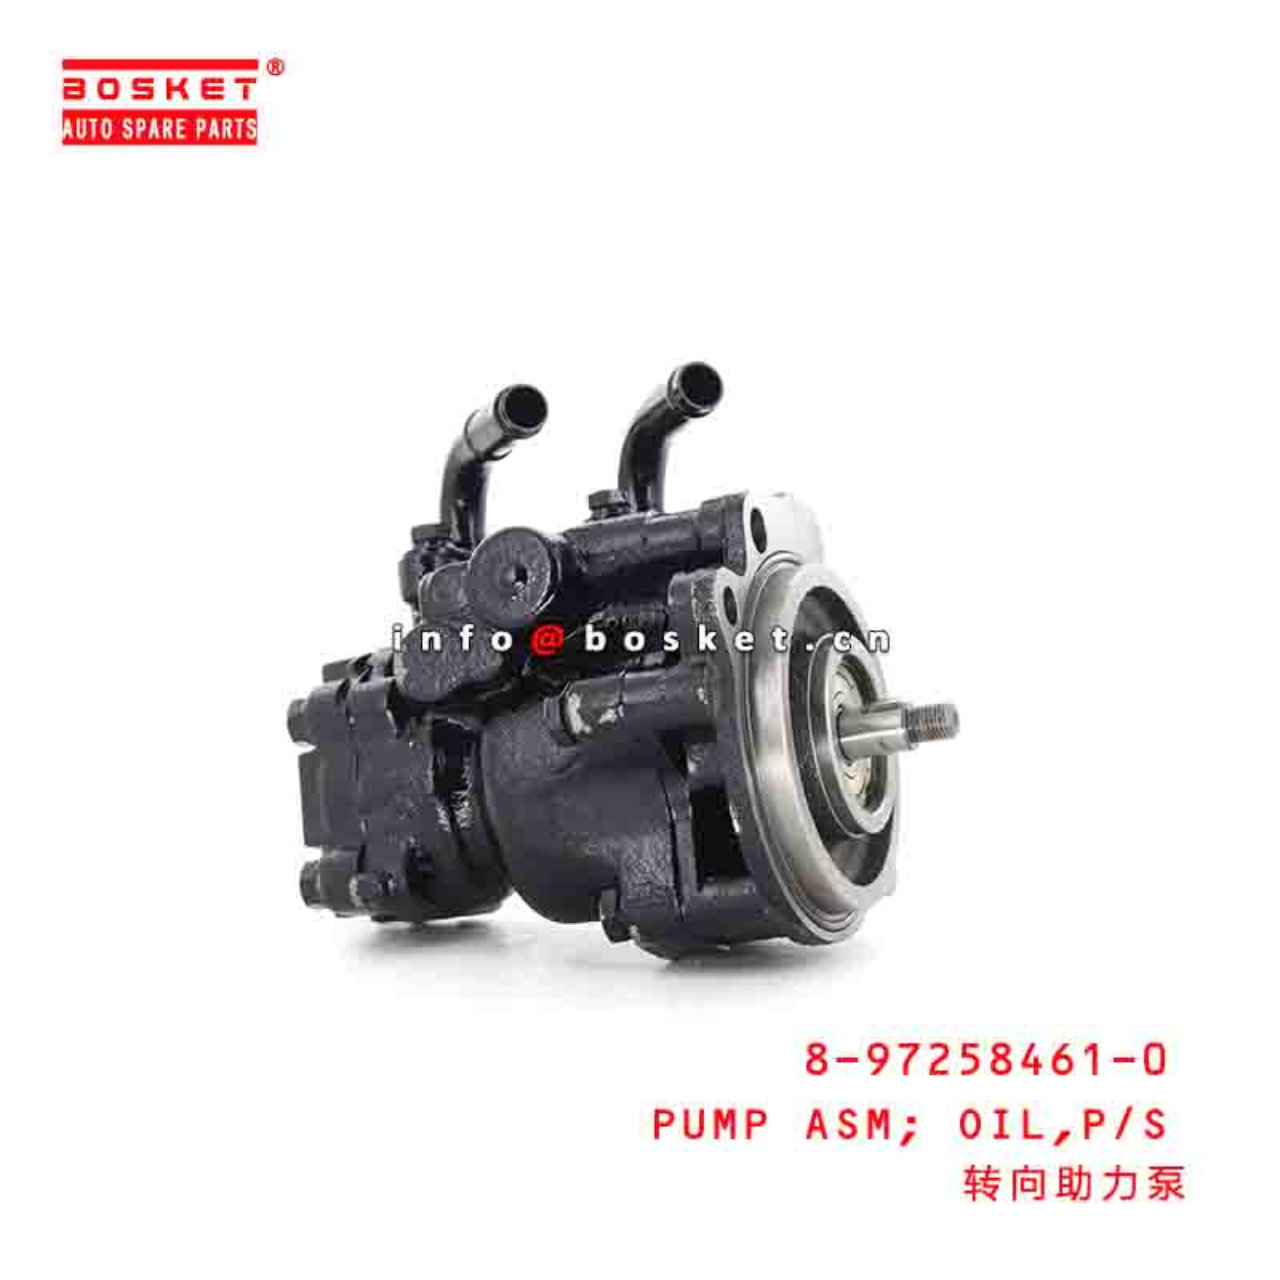 8-97258461-0 8972584610 POWER STEERING PUMP ASSEMBLY Suitable FOR ISUZU 700P 4HG1T